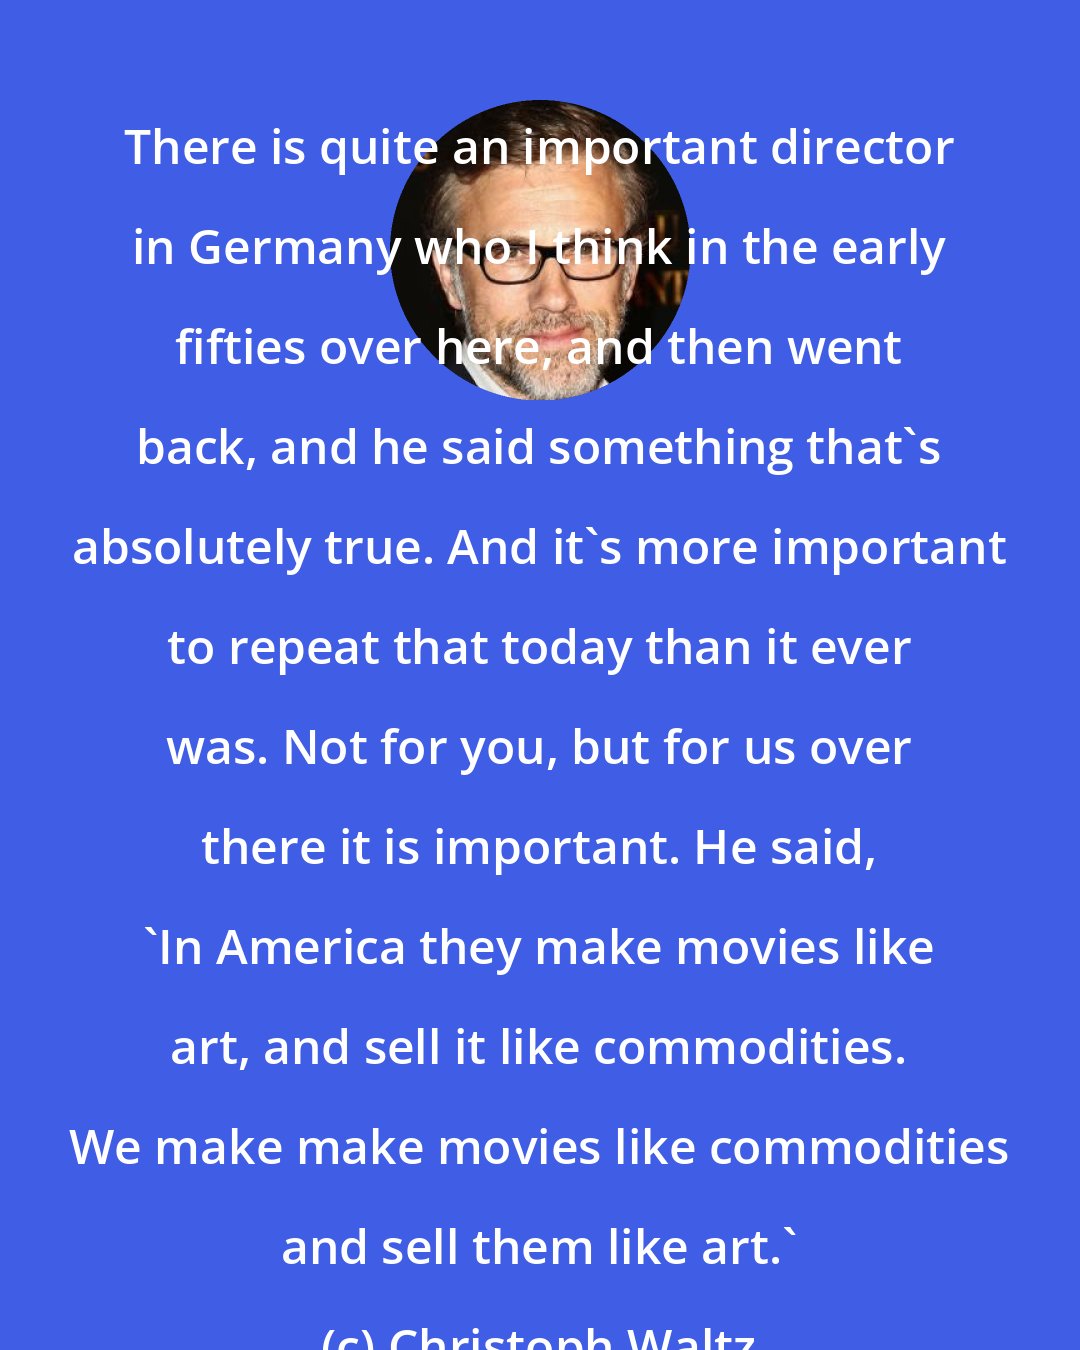 Christoph Waltz: There is quite an important director in Germany who I think in the early fifties over here, and then went back, and he said something that's absolutely true. And it's more important to repeat that today than it ever was. Not for you, but for us over there it is important. He said, 'In America they make movies like art, and sell it like commodities. We make make movies like commodities and sell them like art.'